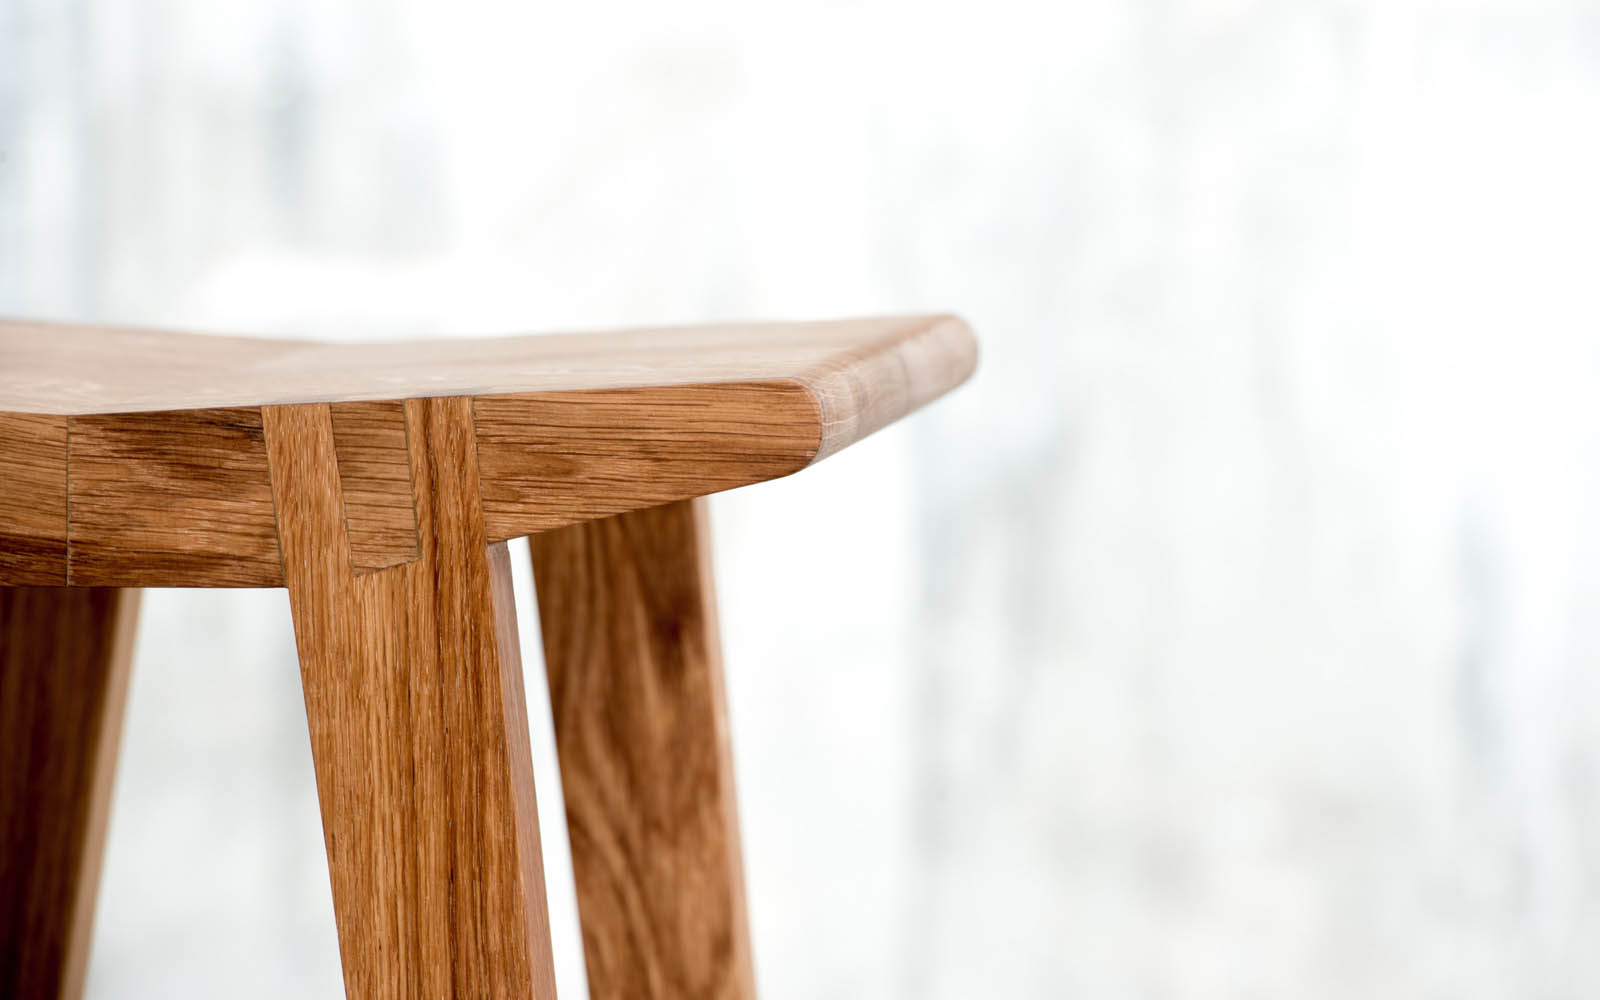 Grable High Stool by QoWood